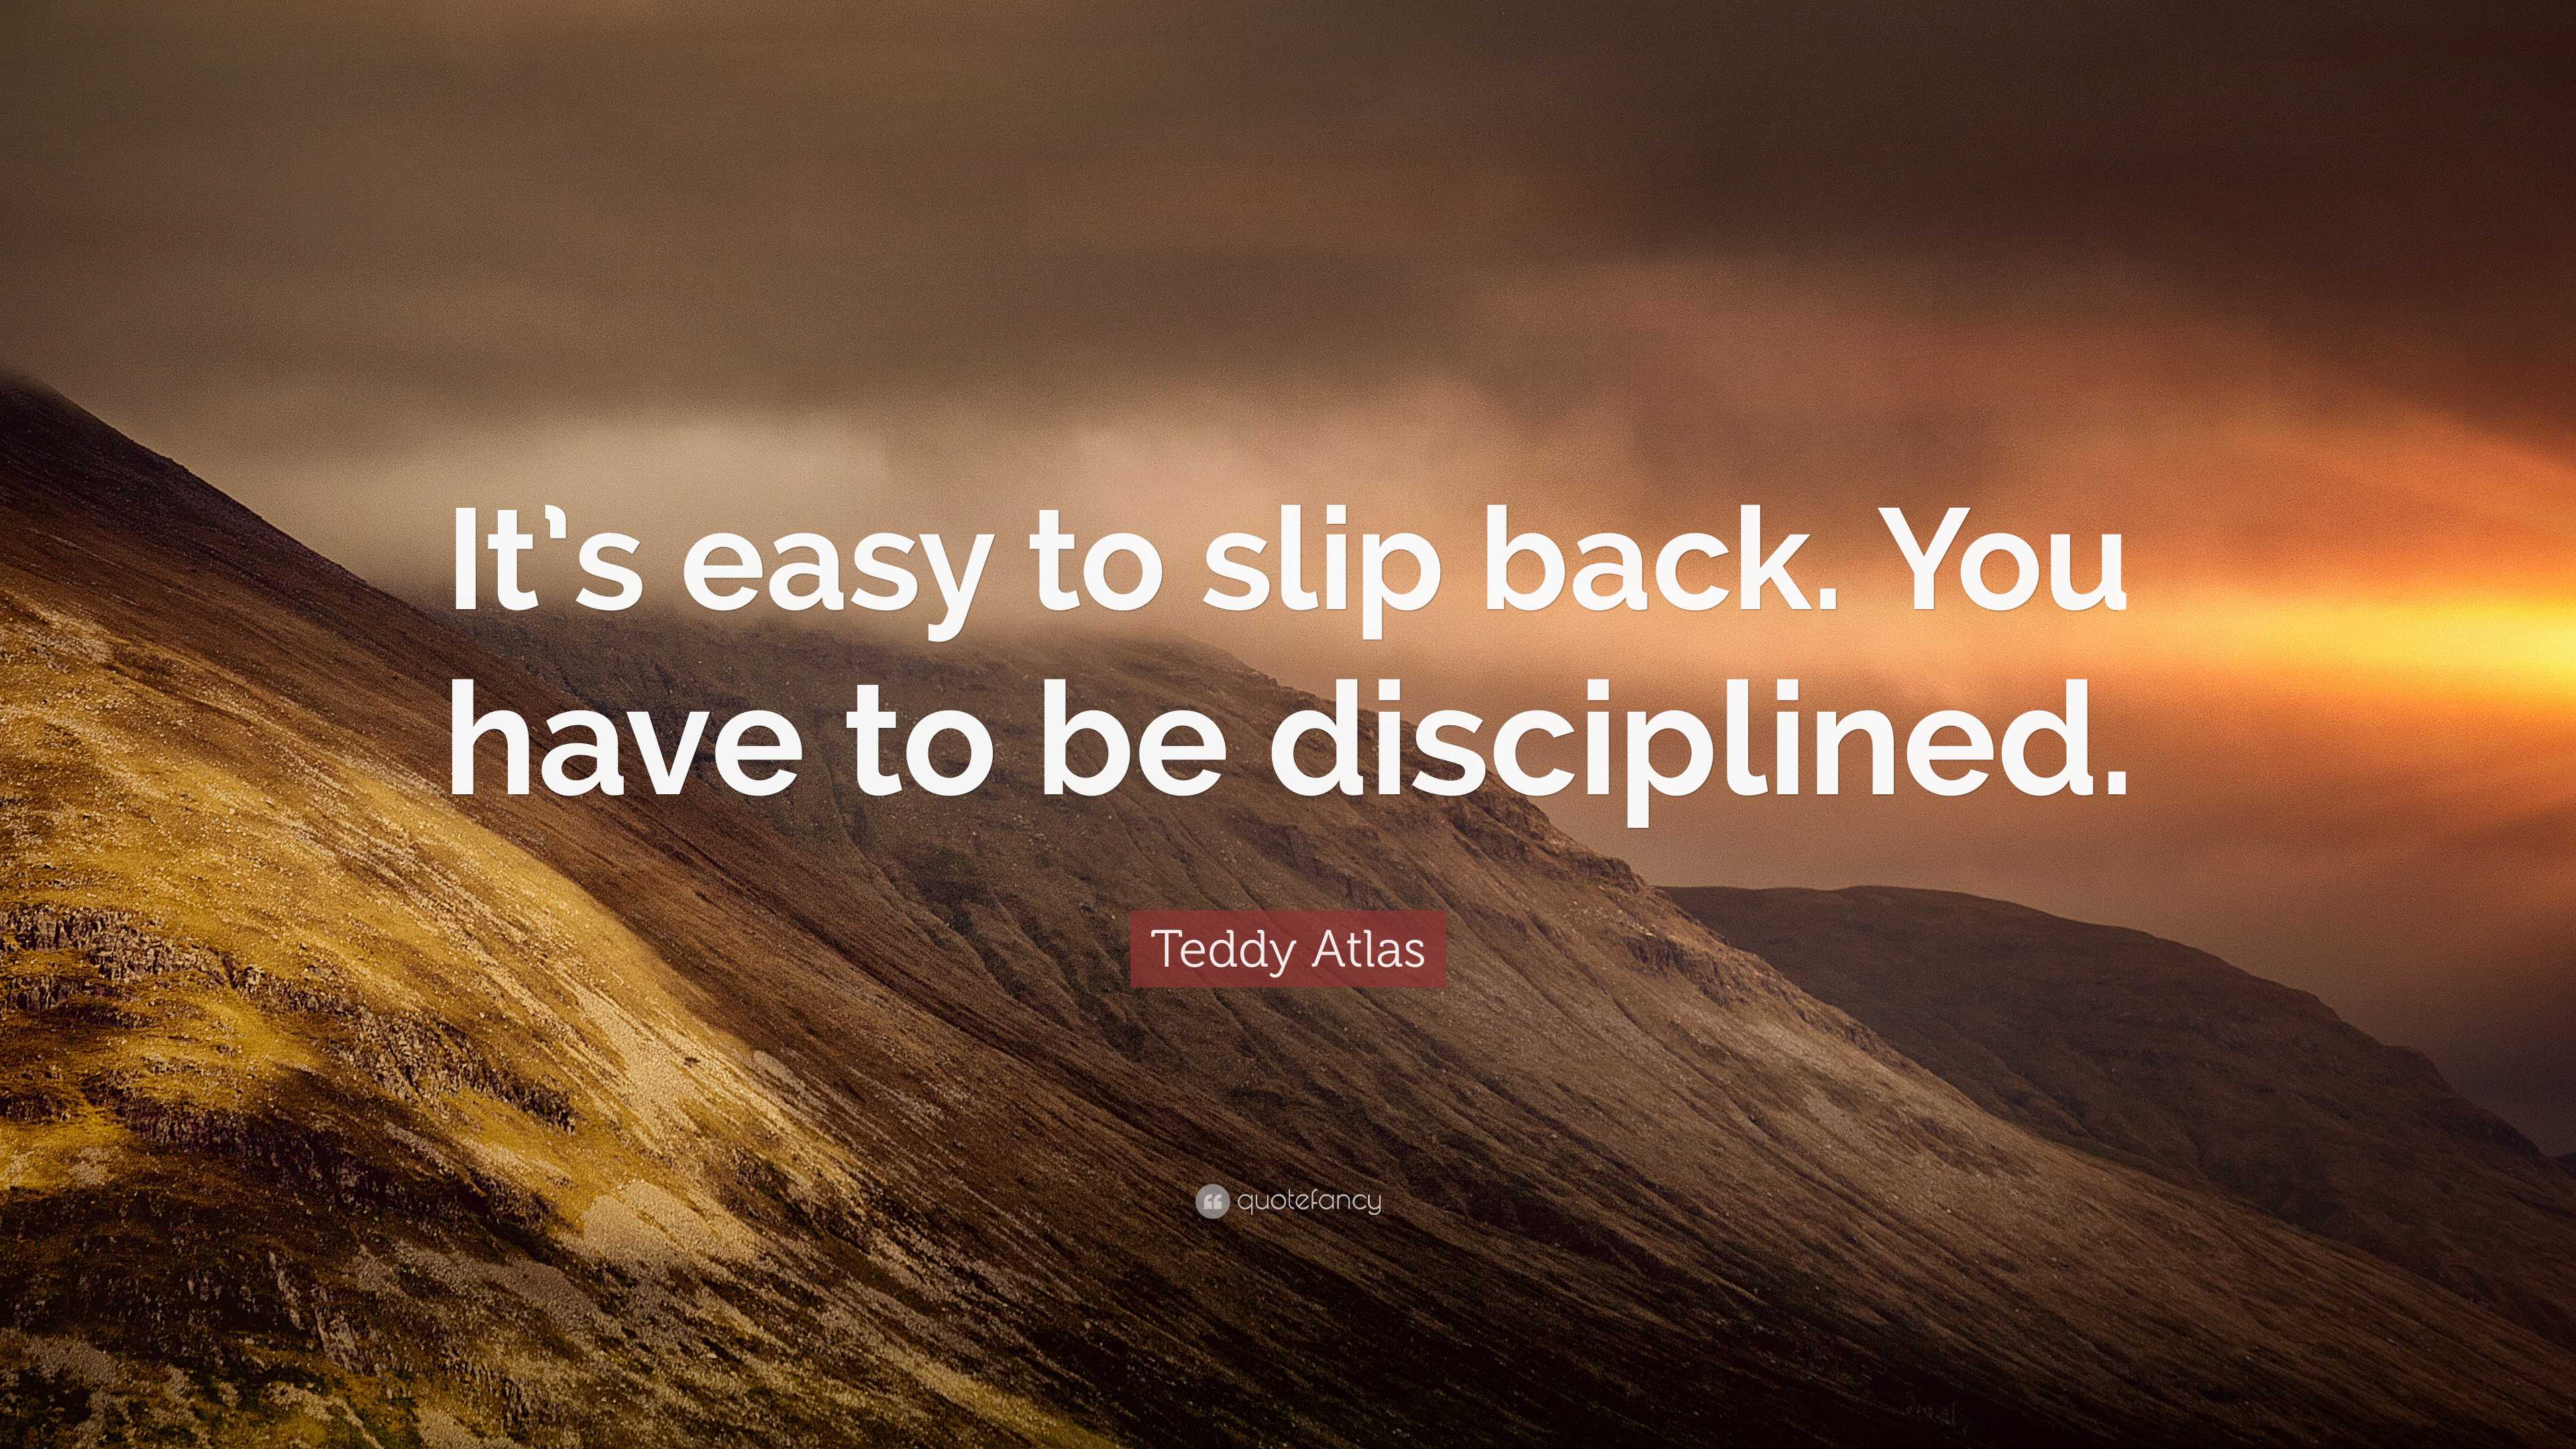 Teddy Atlas Quote: “It's easy to slip back. You have to be disciplined.”